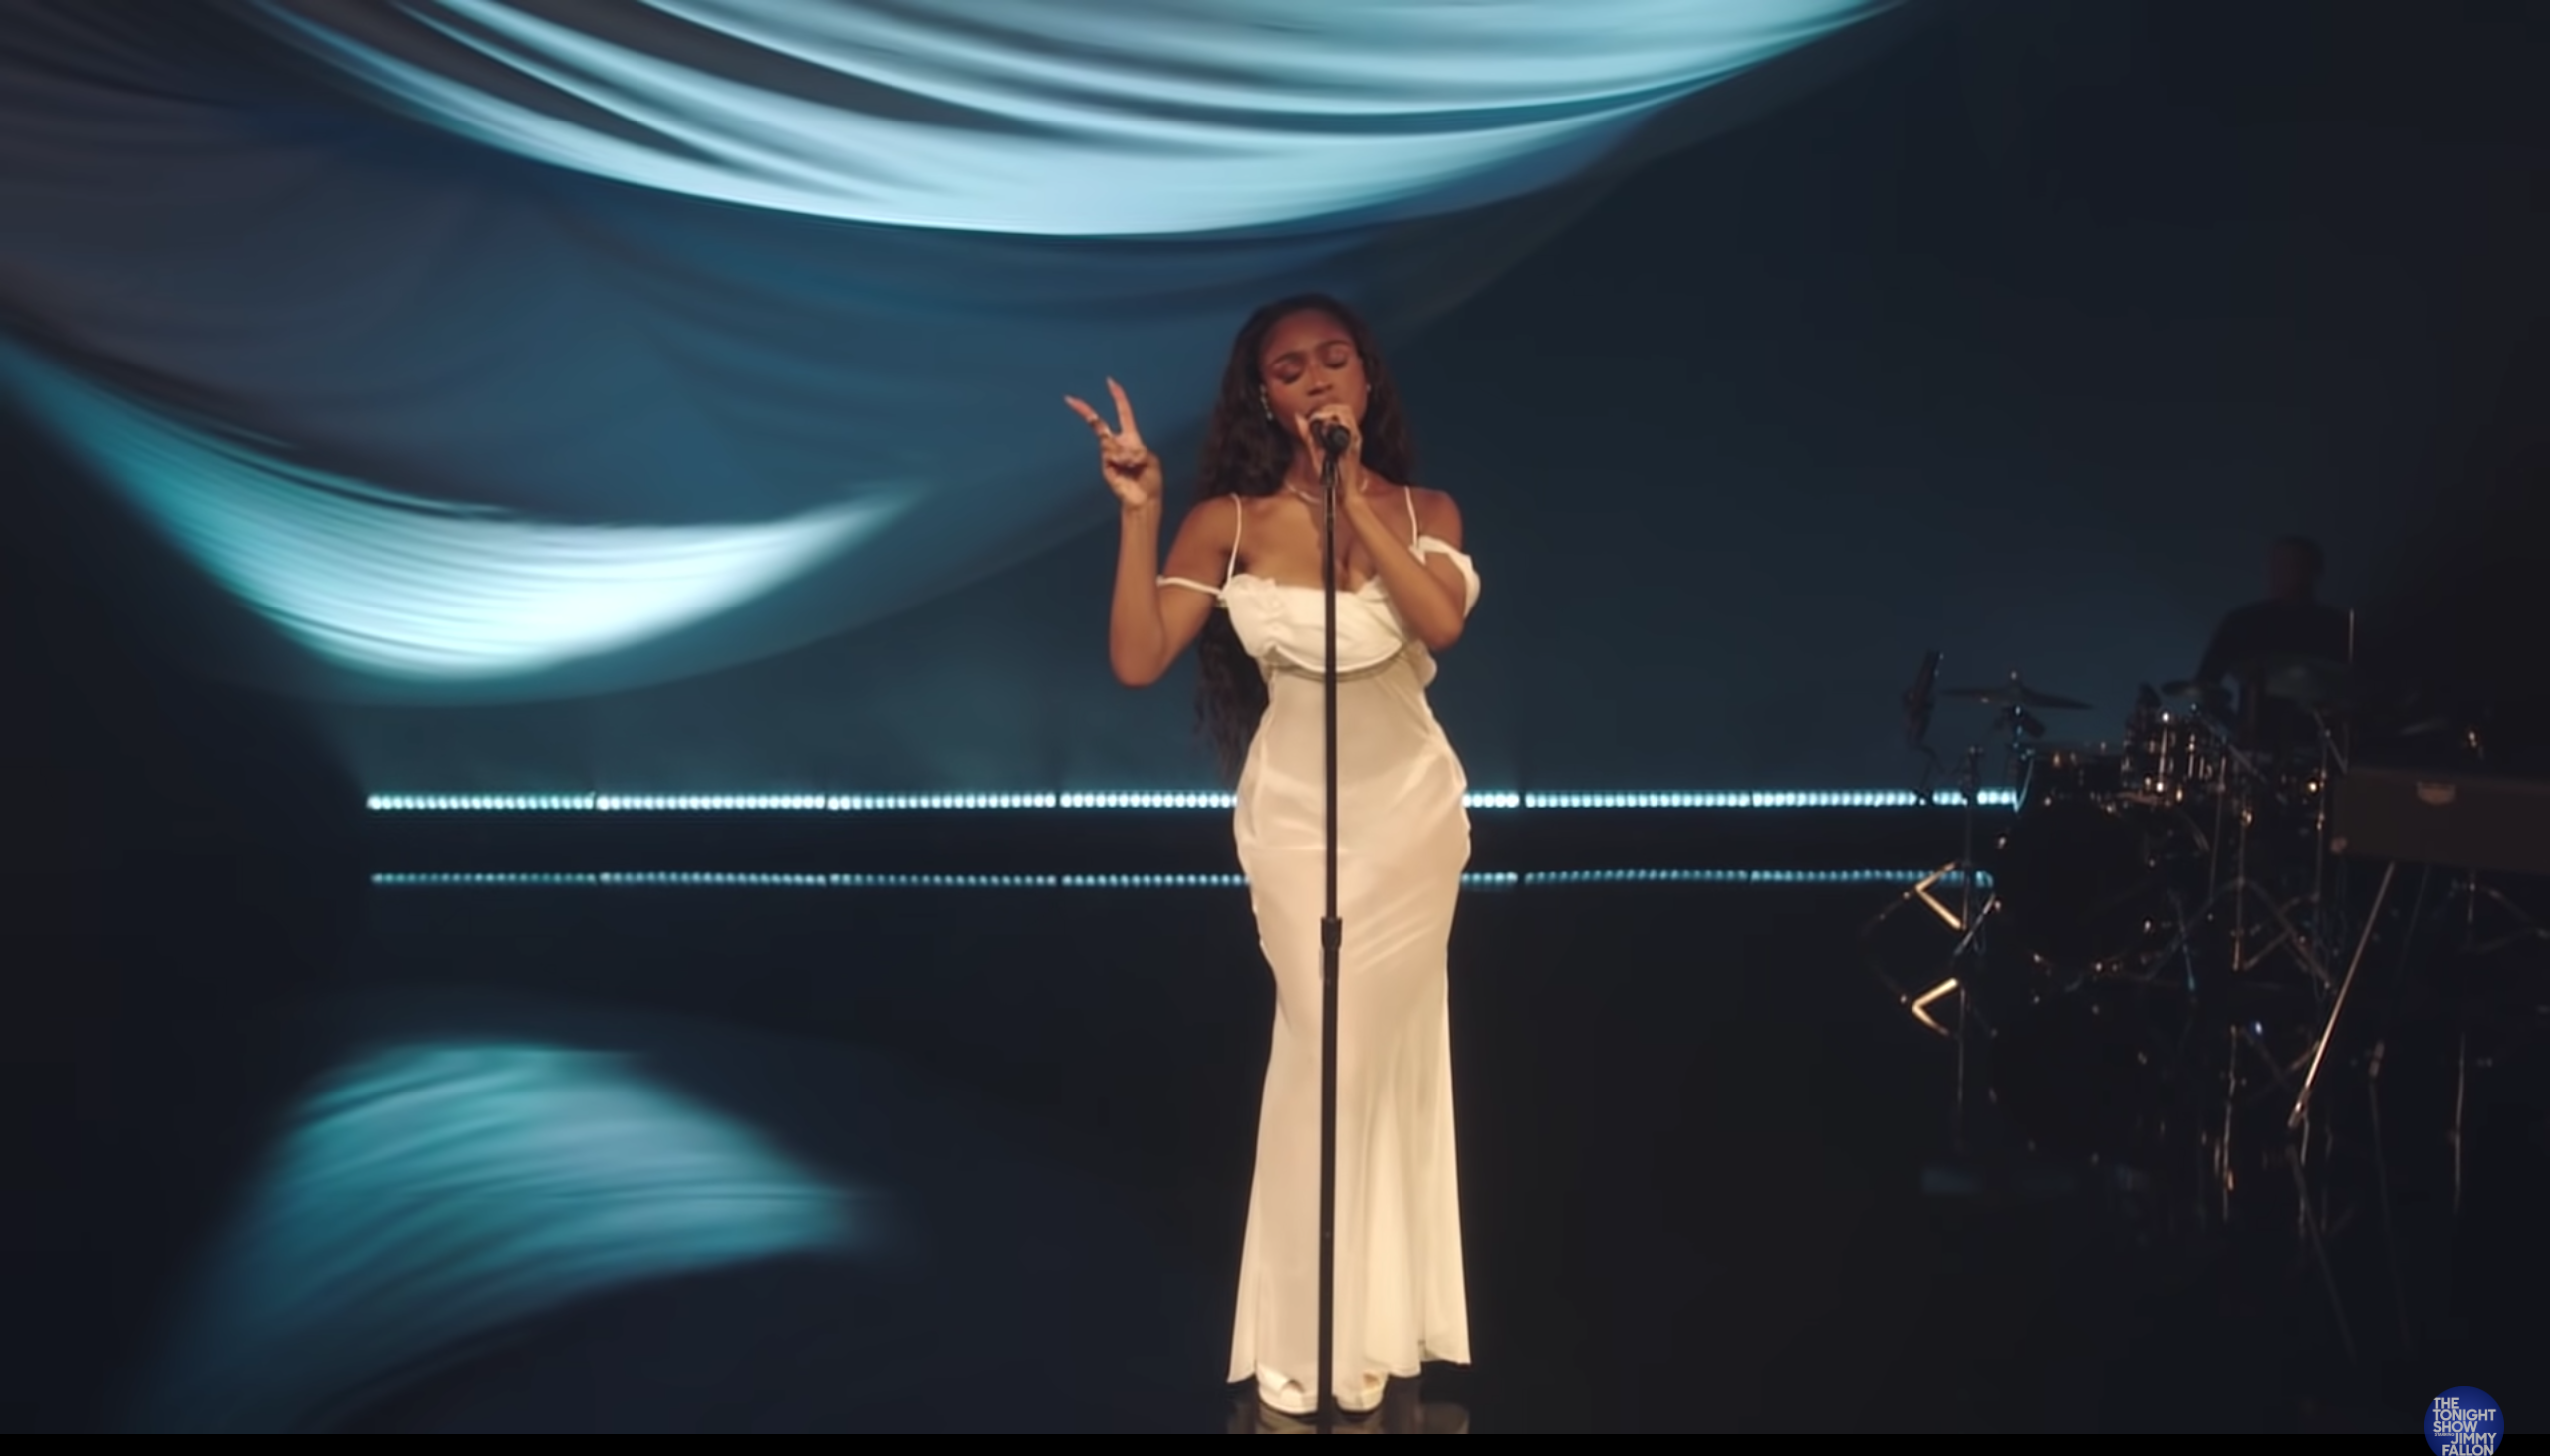 Normani in an all white dress singing her new song while doing a peace sign